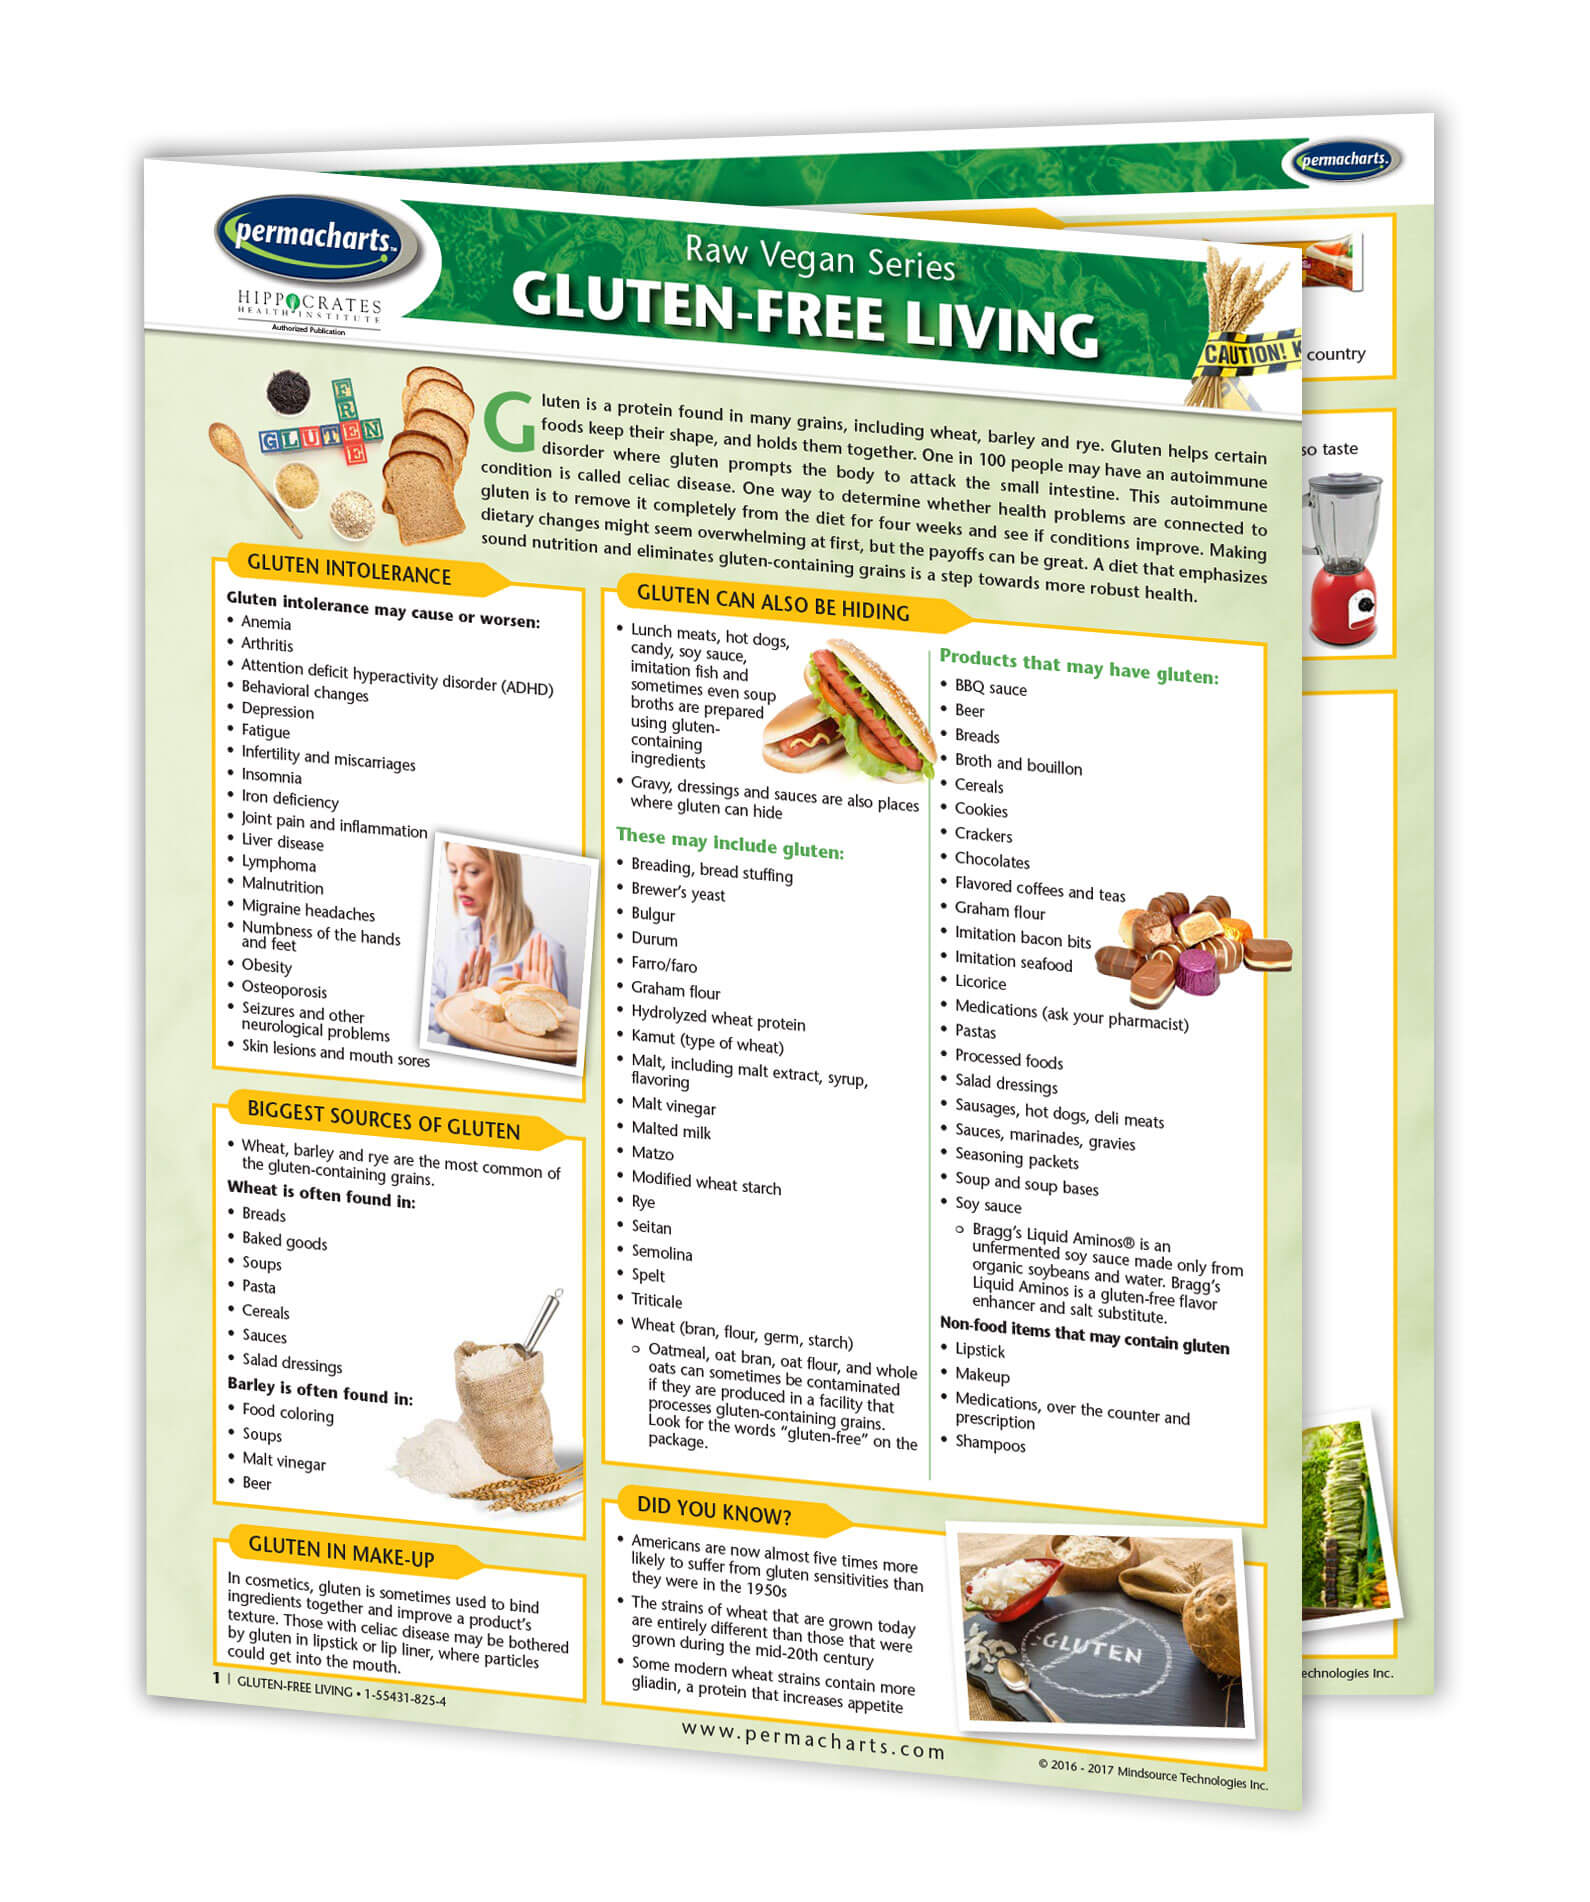 GLUTEN FREE DIET TO A HEALTHIER LIFE: A Guide to Gluten Free Diet See more